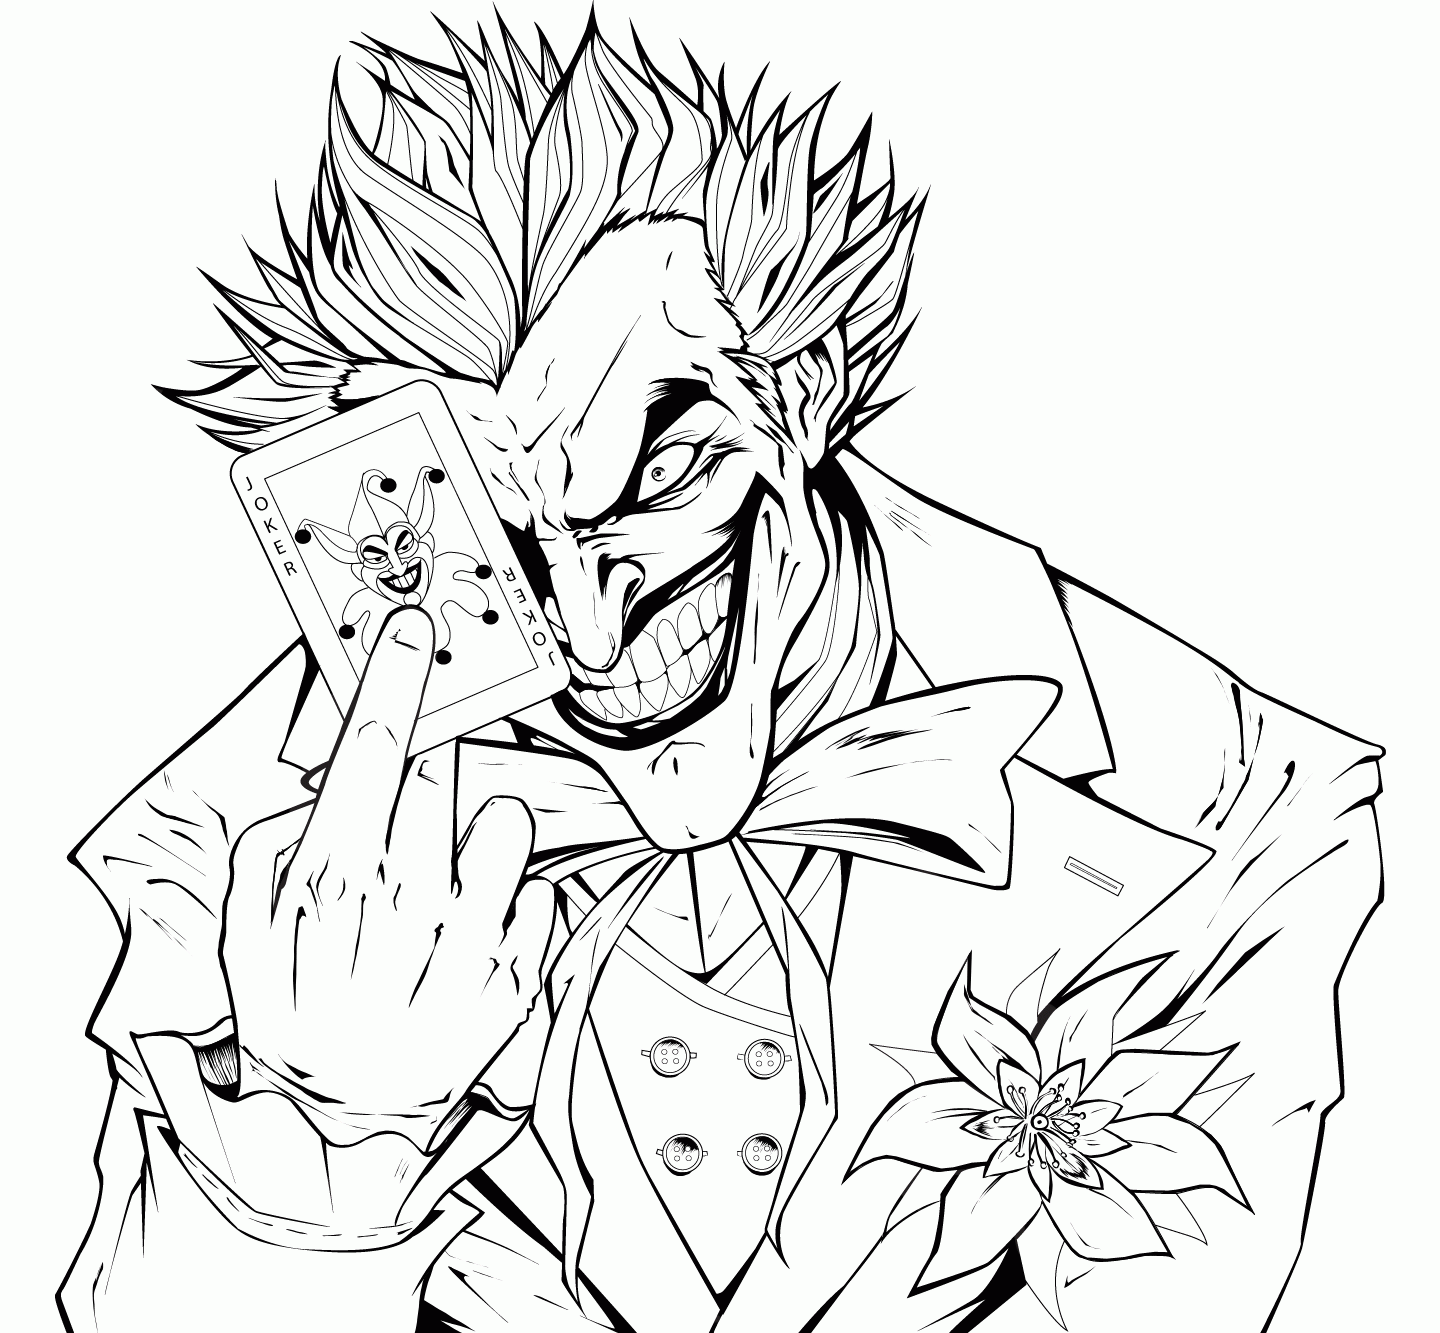 joker-coloring-pages-coloring-home